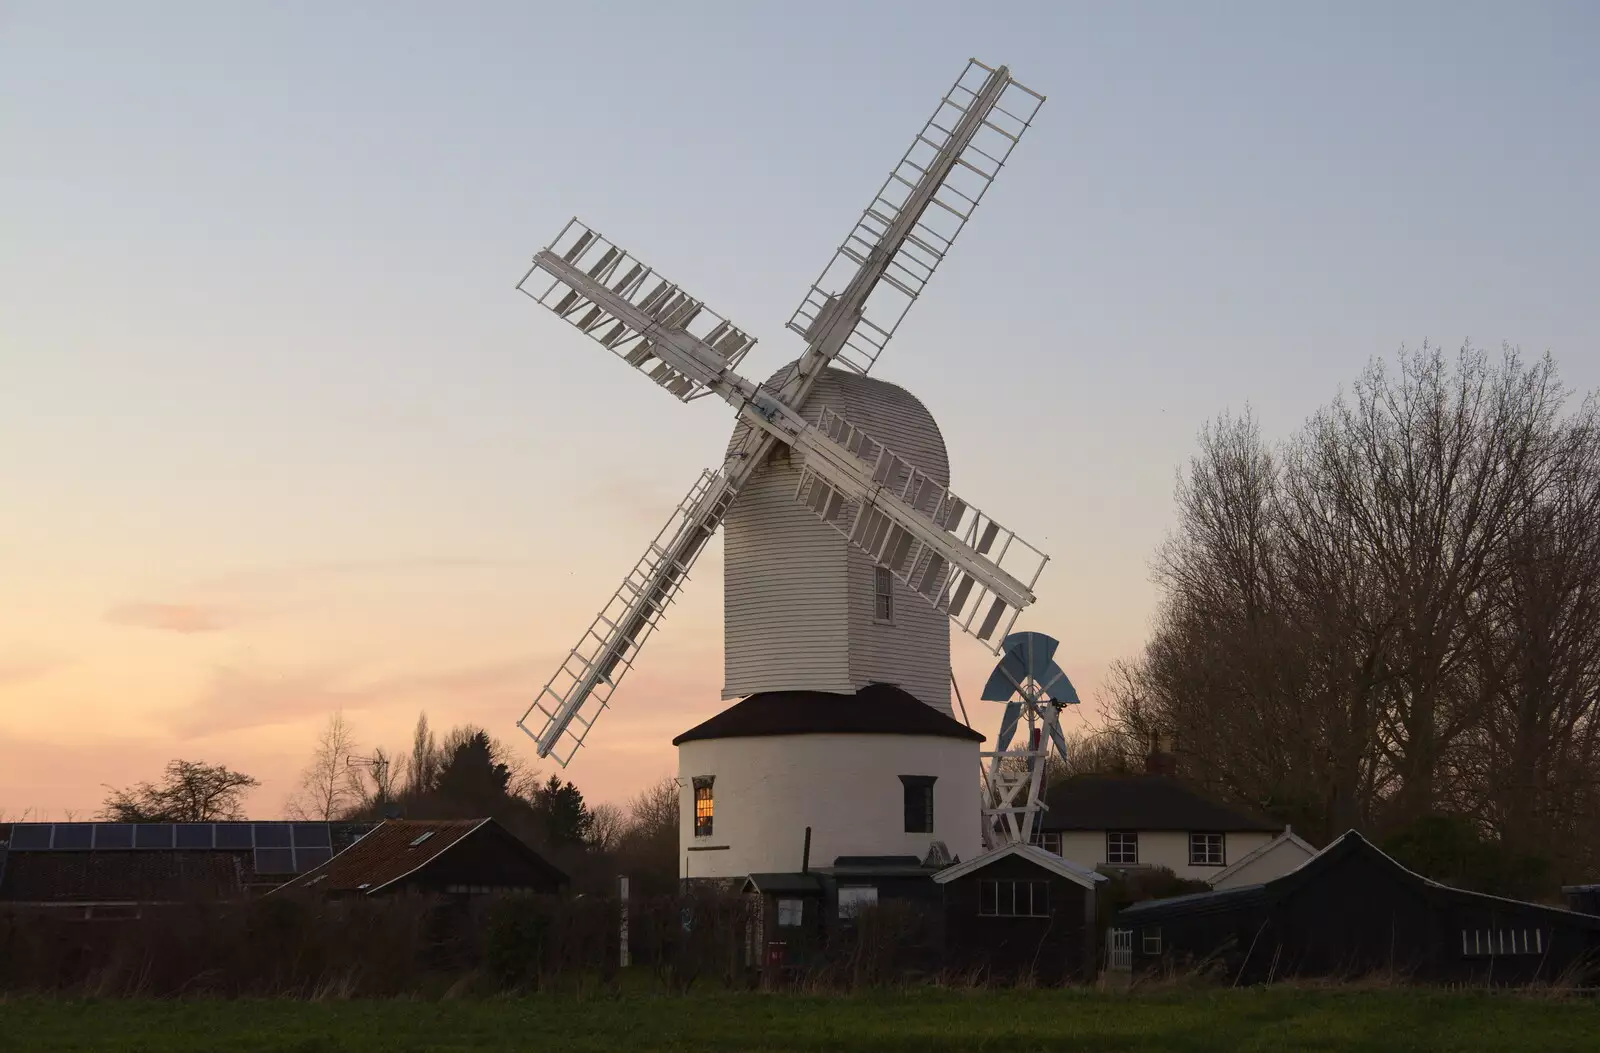 Another view of the post mill in the dusk, from A Trip to Orford Castle, Orford, Suffolk - 26th February 2022